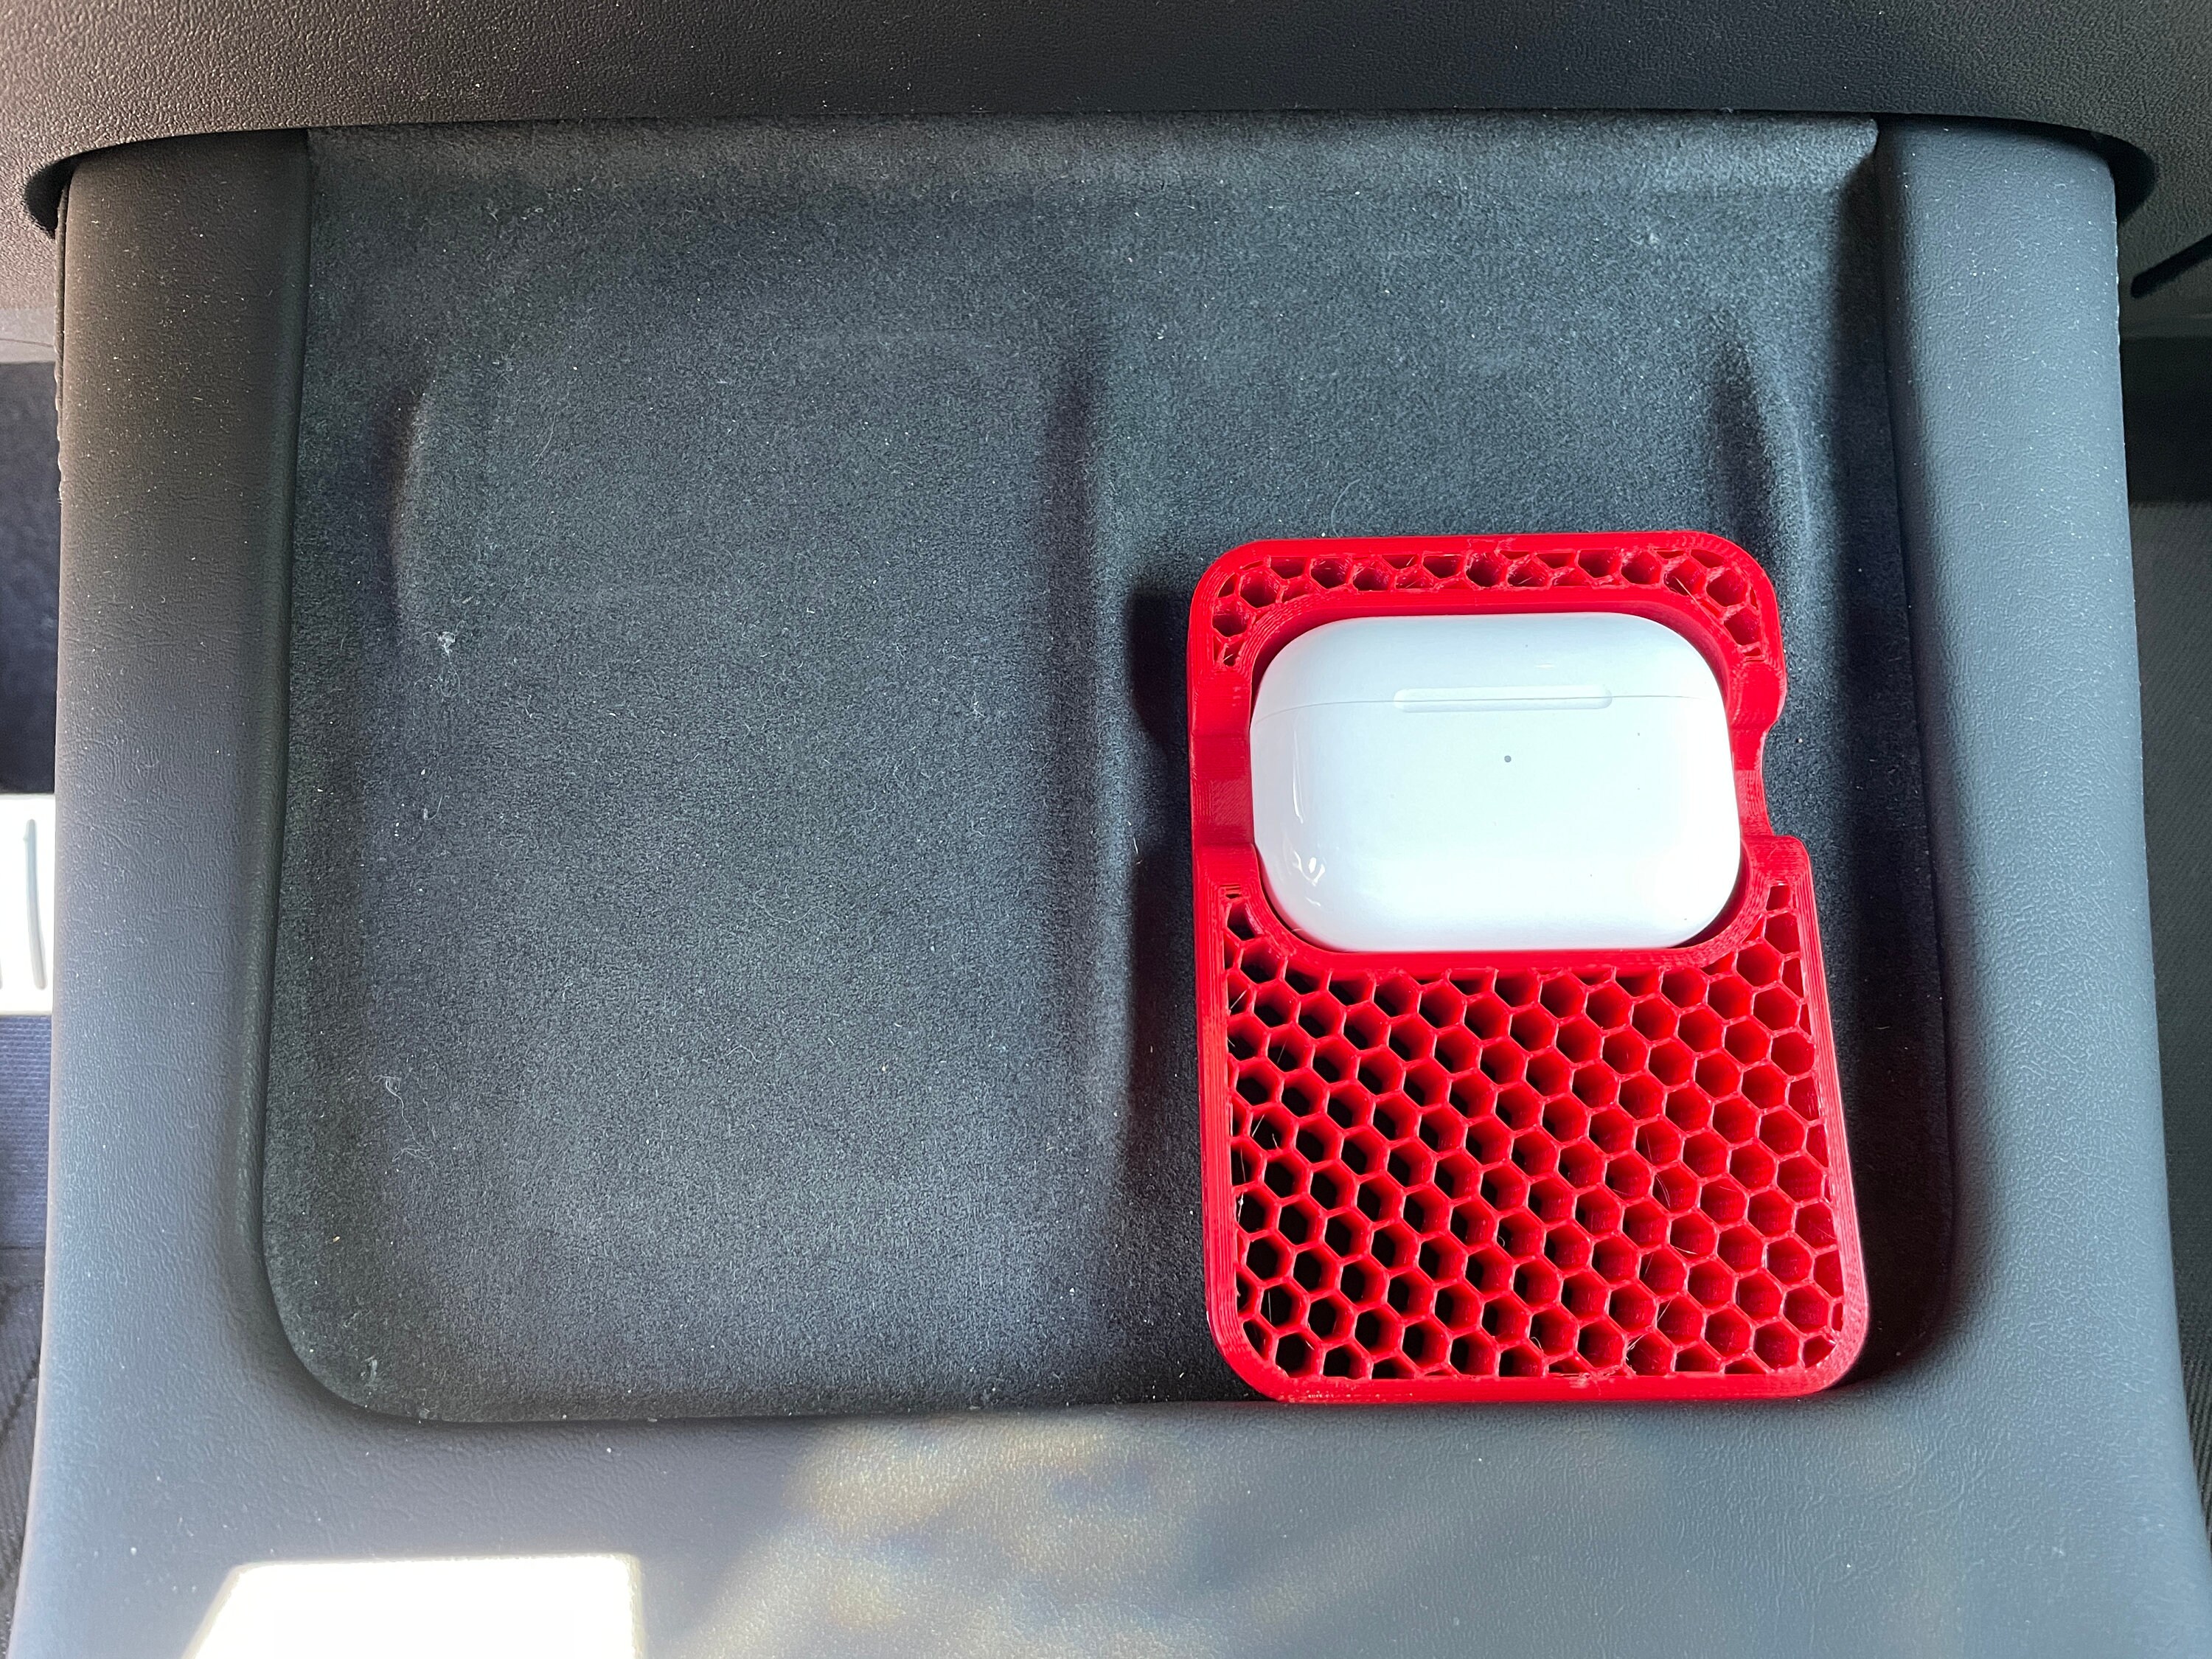 AirPods holder for the inductive charging cradle in the Tesla with OOONO  mounting option